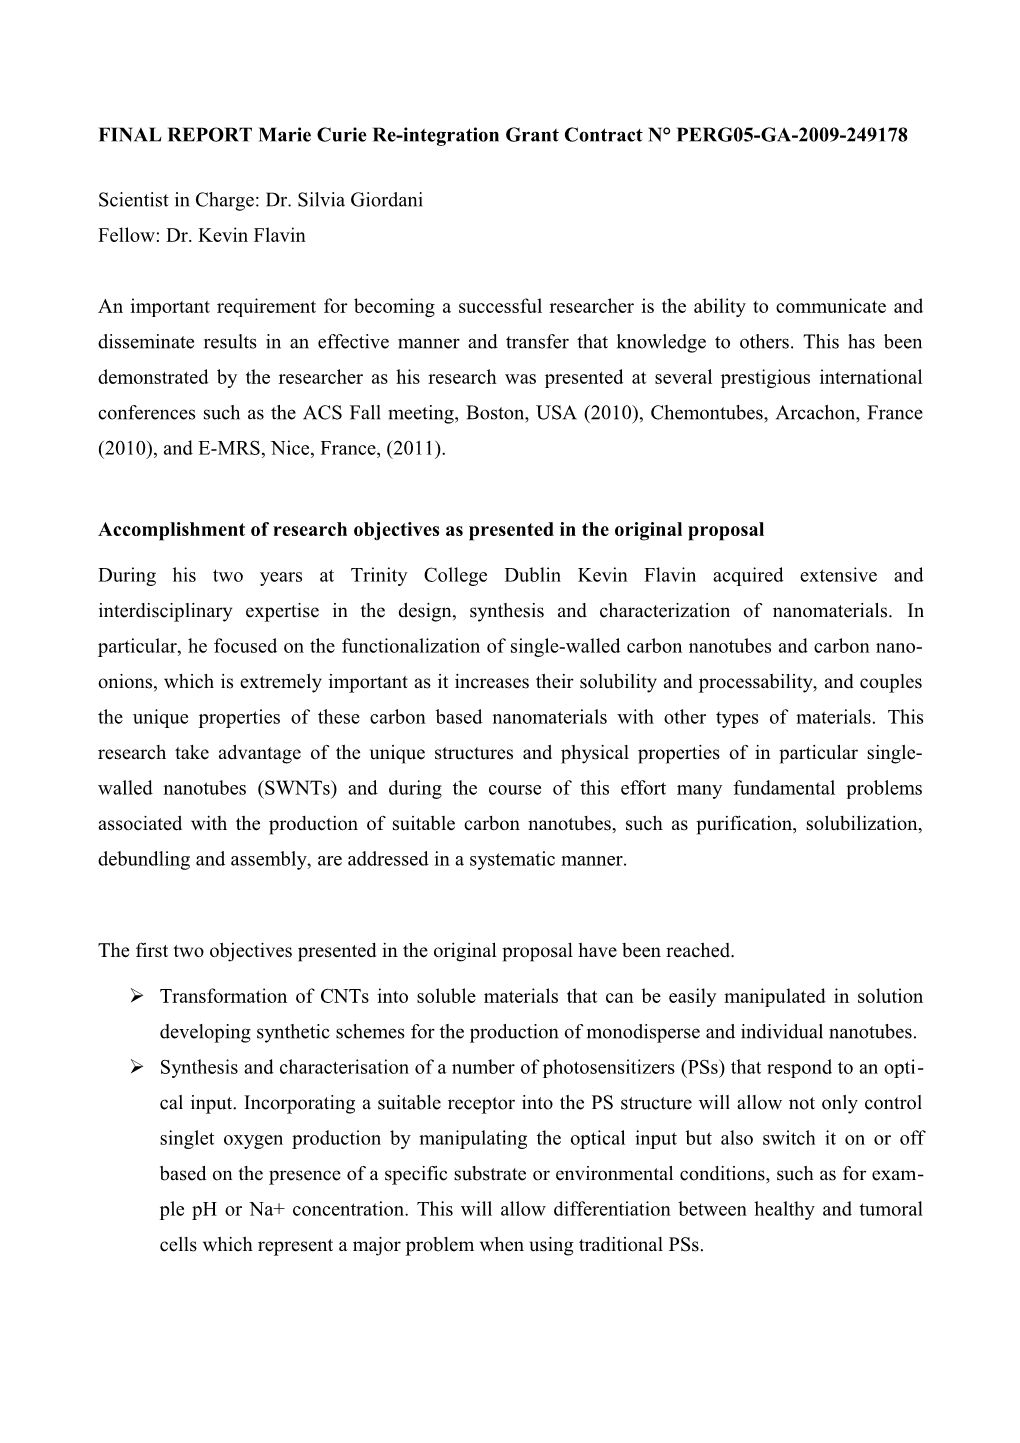 FINAL REPORT Marie Curie Re-Integration Grant Contract N PERG05-GA-2009-249178